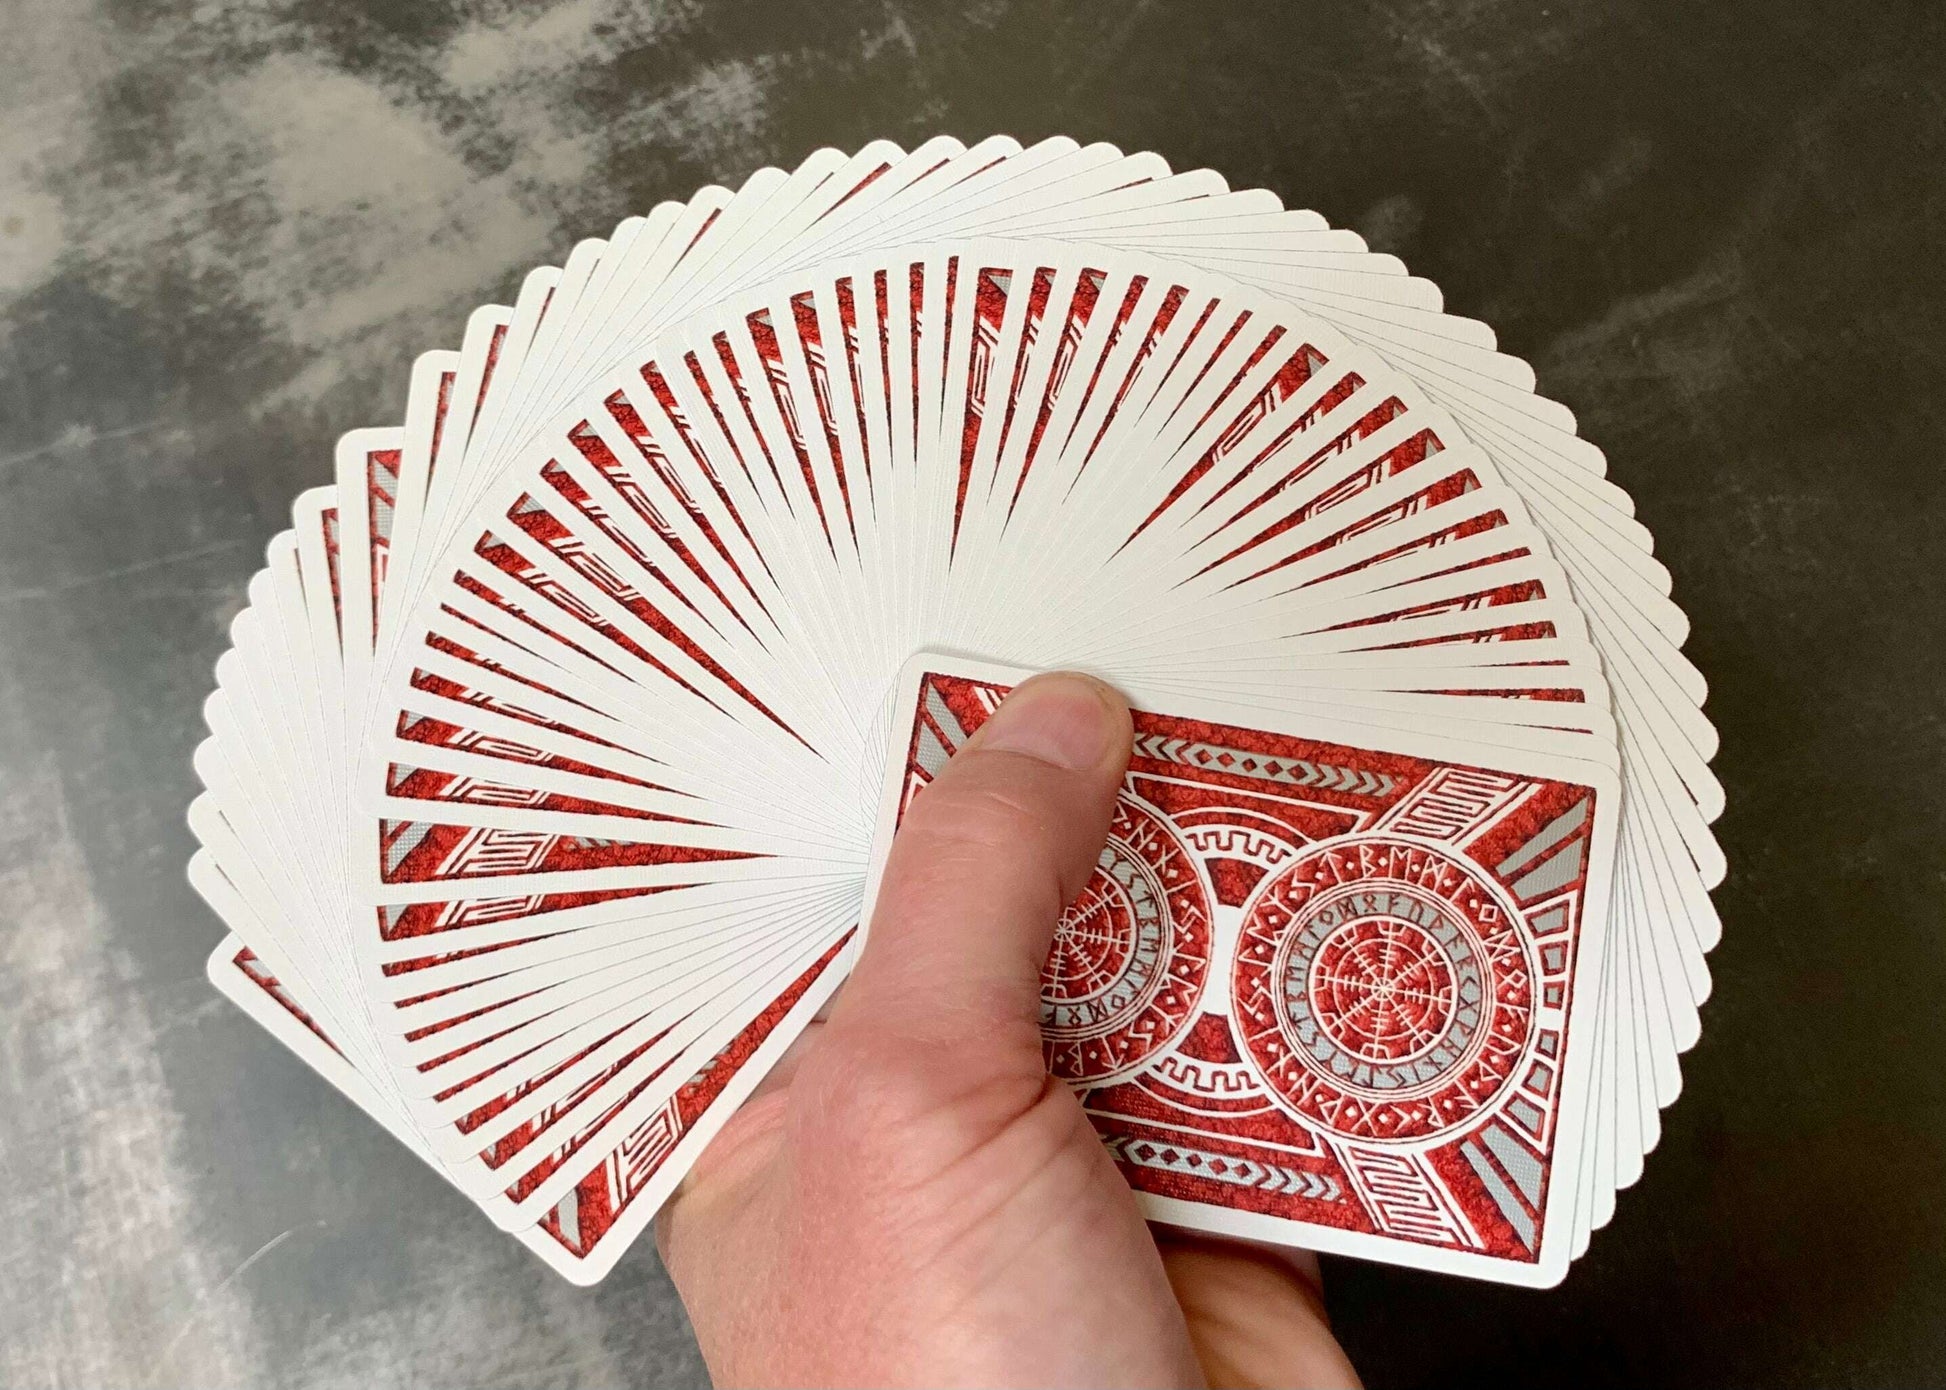 PlayingCardDecks.com-Runes v2 Gilded Bicycle Playing Cards